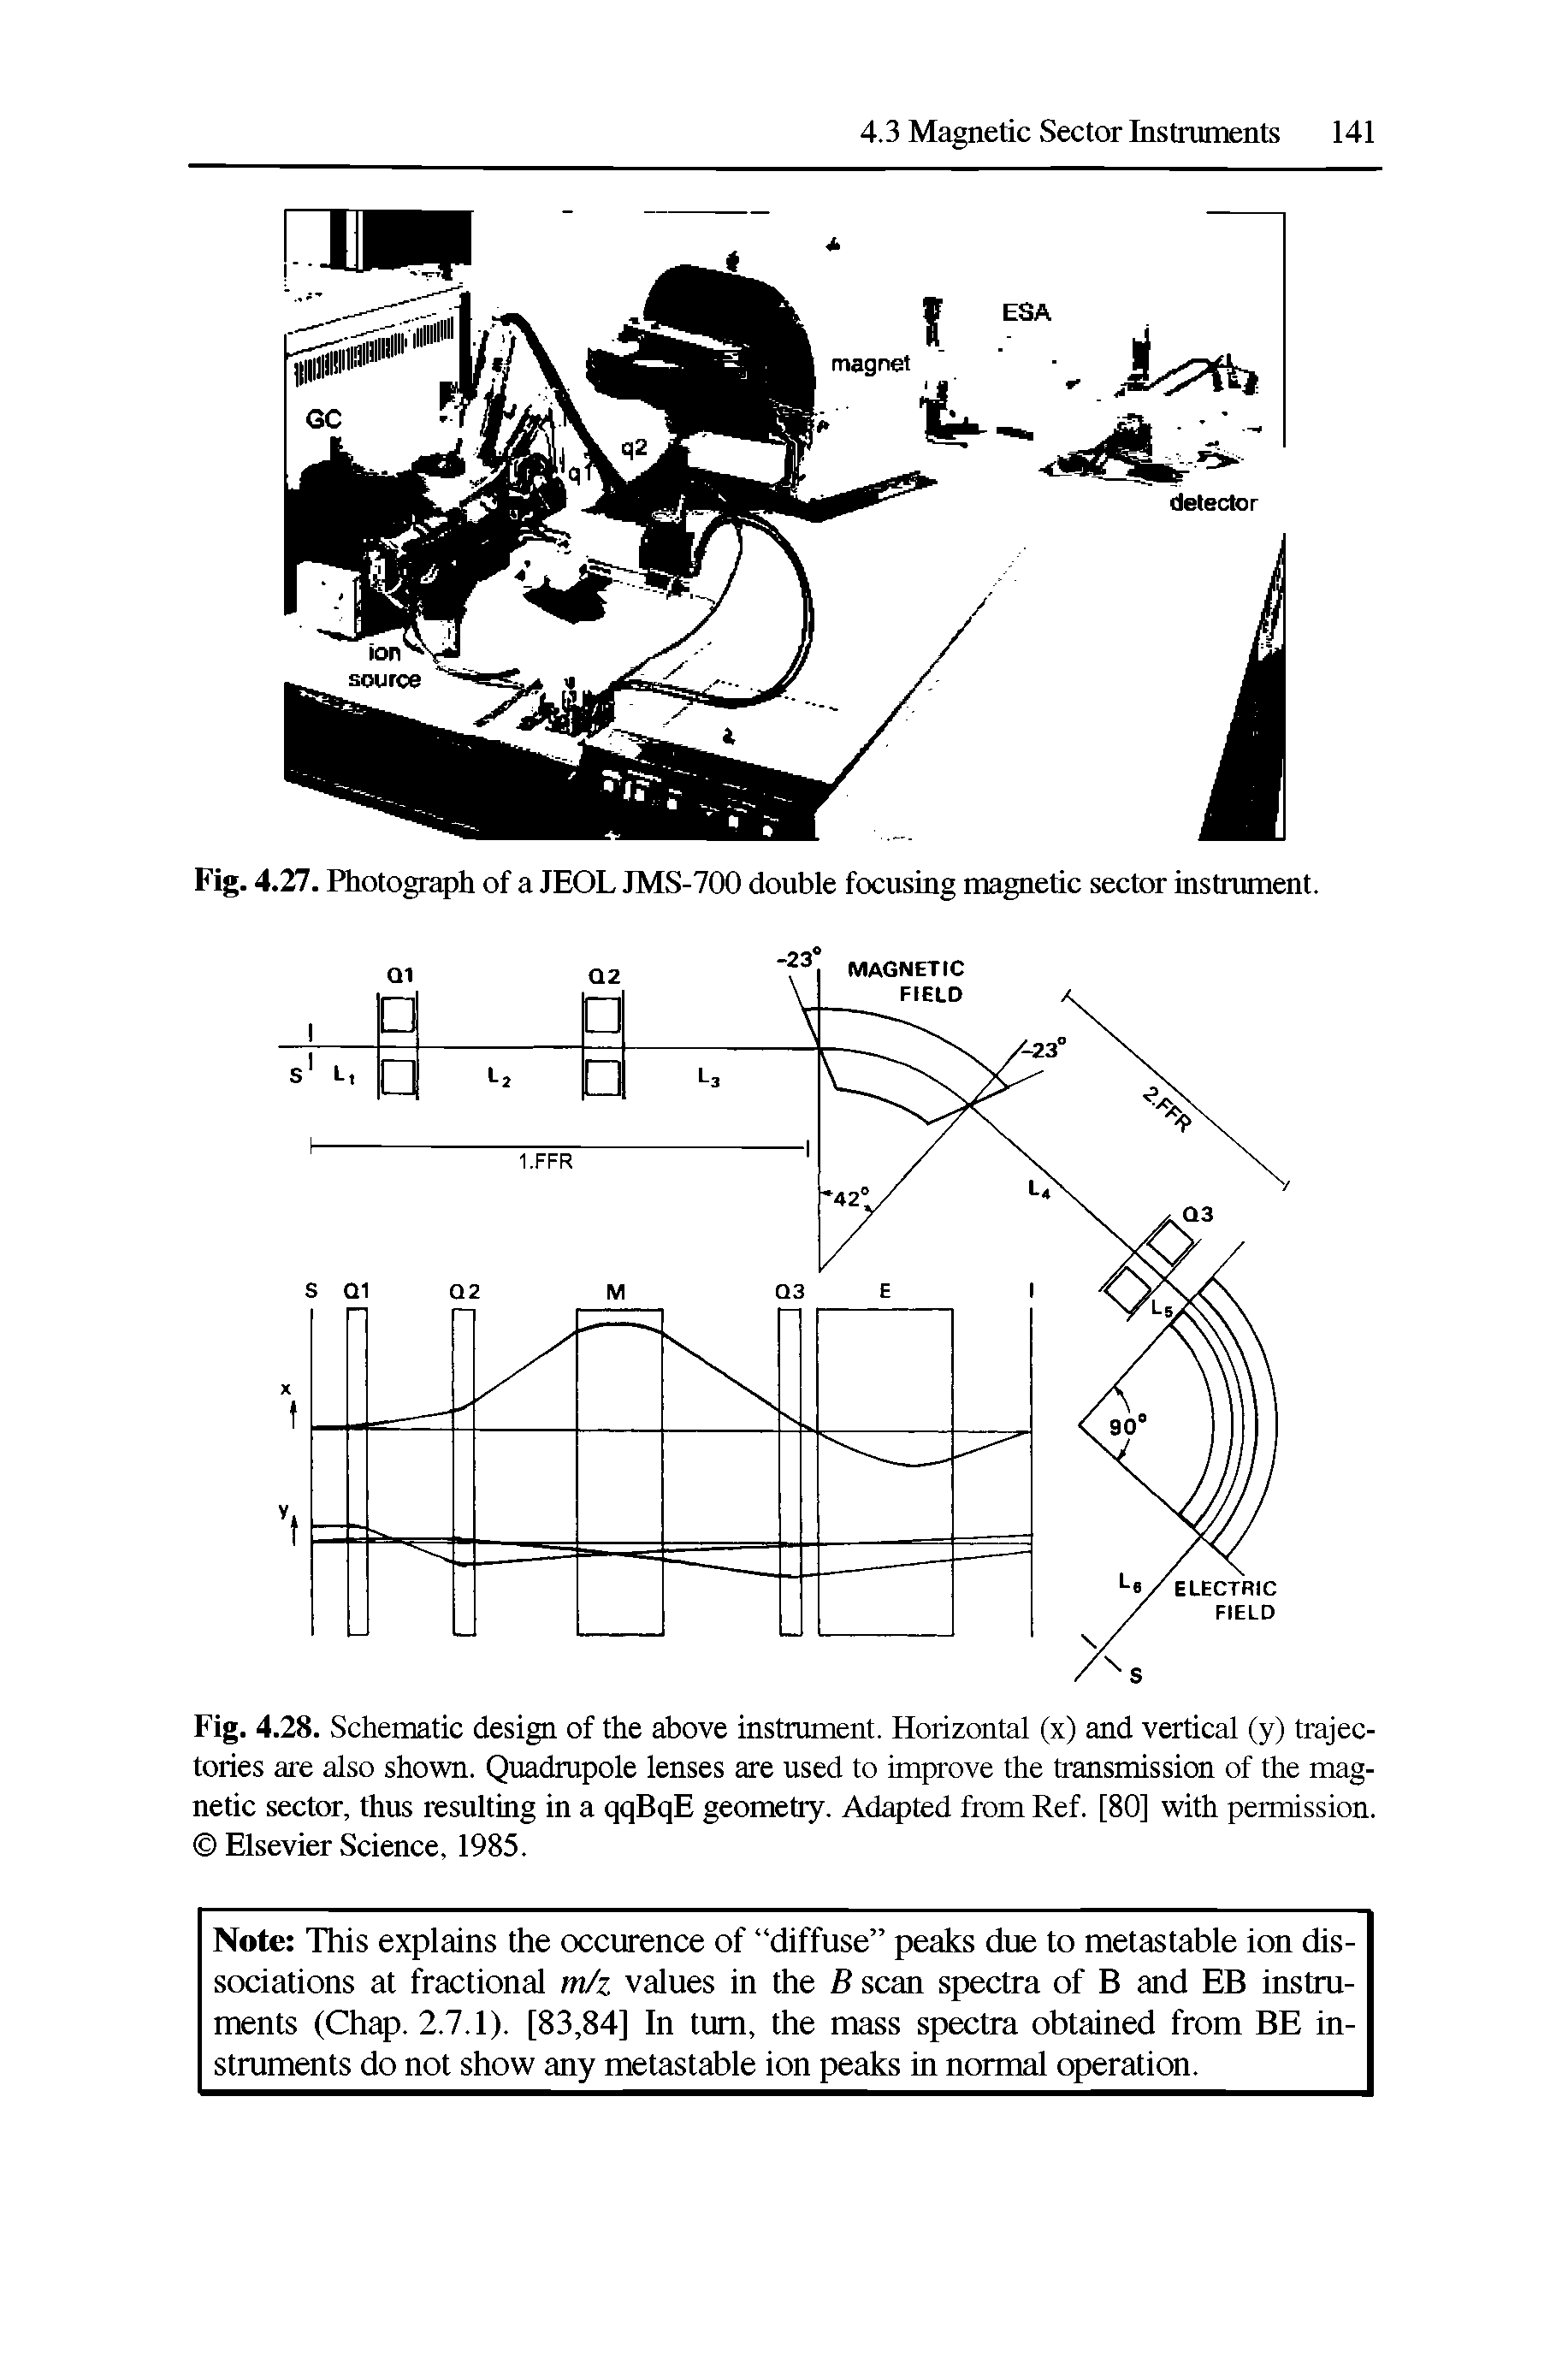 Fig. 4.28. Schematic design of the above instrument. Horizontal (x) and vertical (y) trajectories are also shown. Quadmpole lenses are used to improve the transmission of the magnetic sector, thus resulting in a qqBqE geometry. Adapted from Ref. [80] with permission. Elsevier Science, 1985.